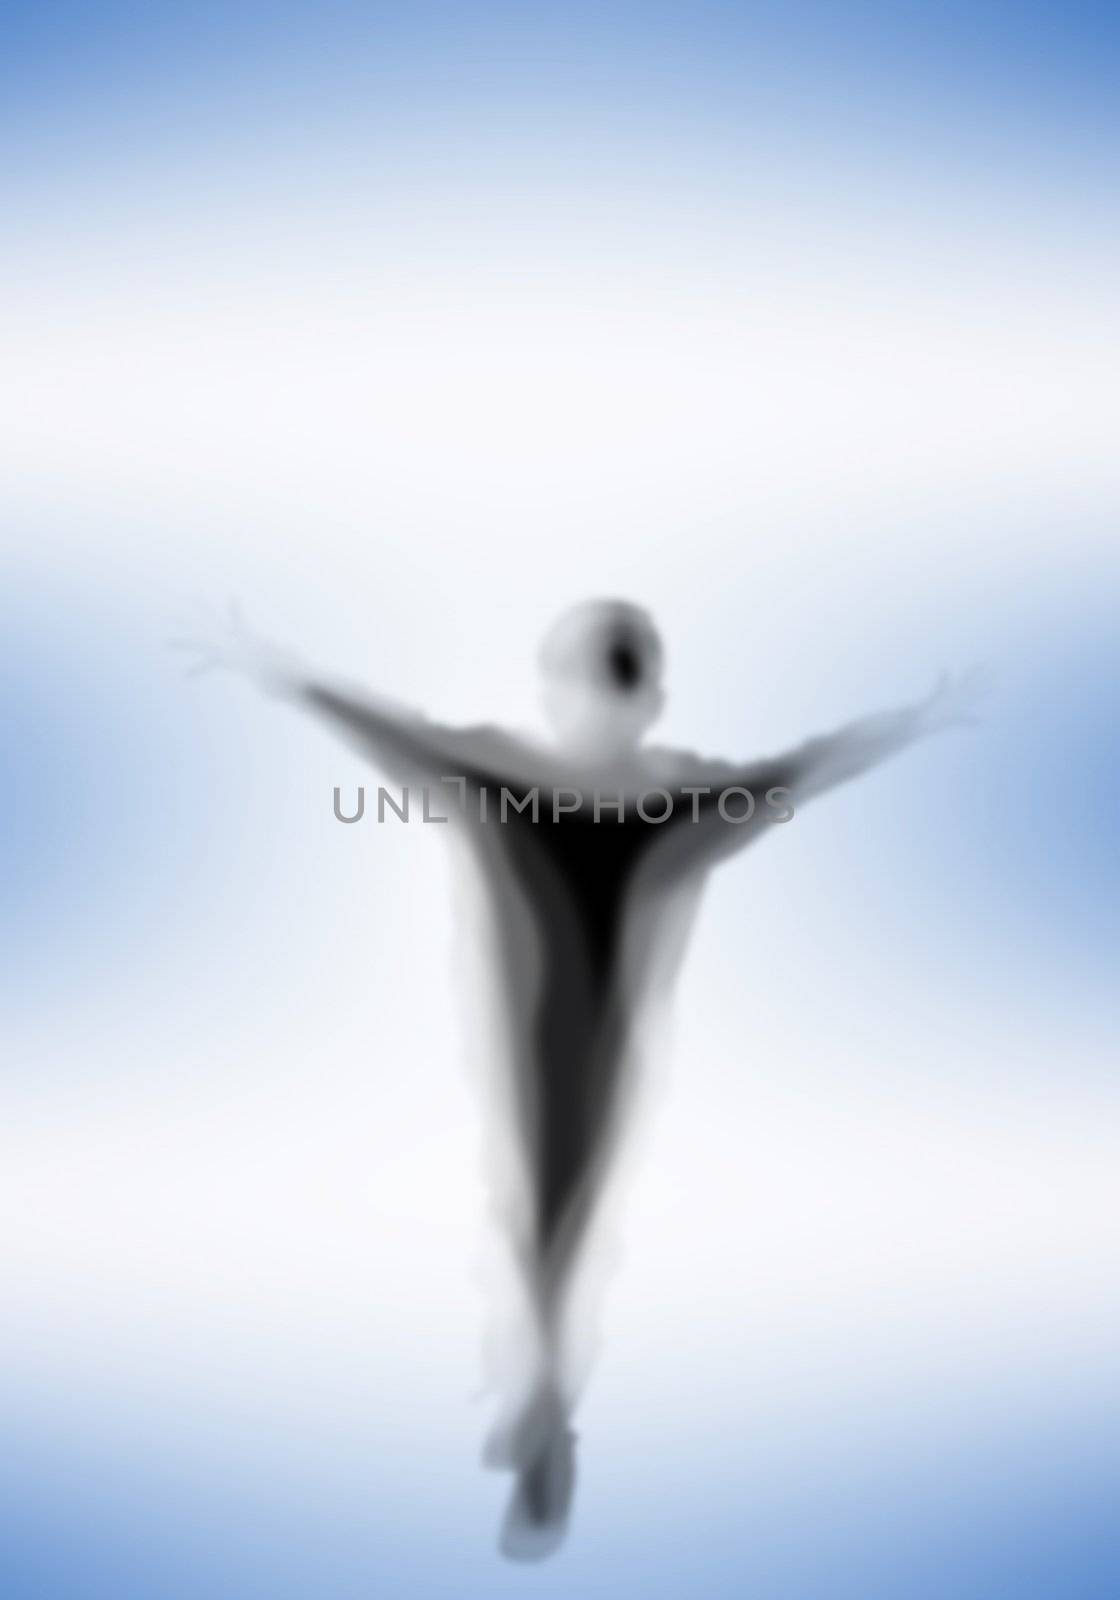 Image with a blurred female silhouette against colour background